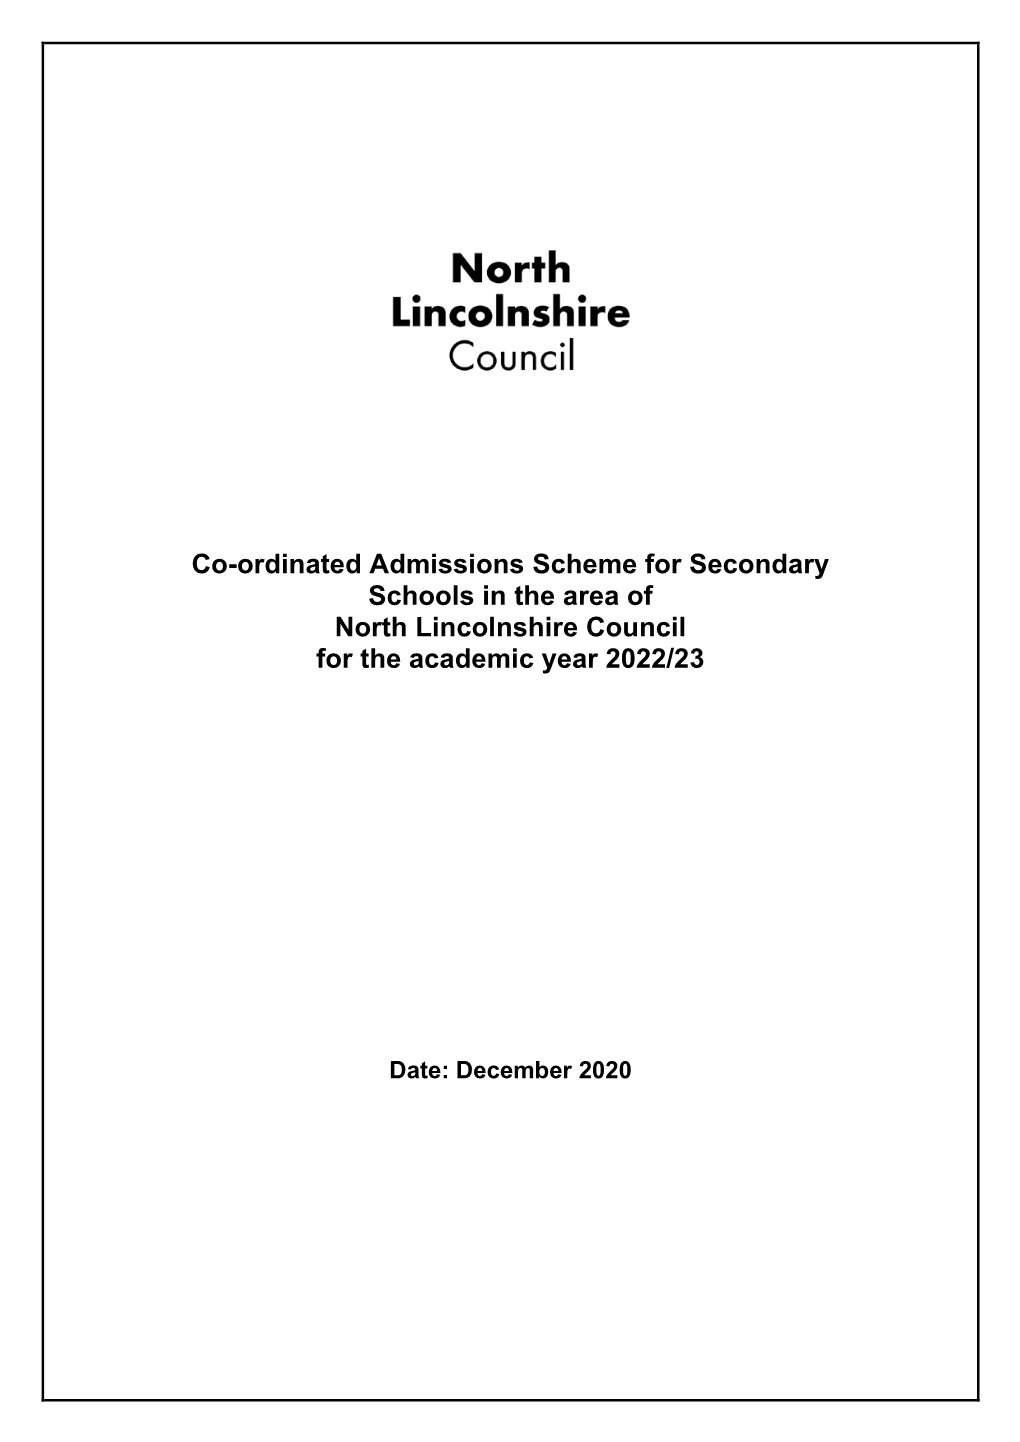 North Lincolnshire Determined Co-Ordinated Scheme Secondary